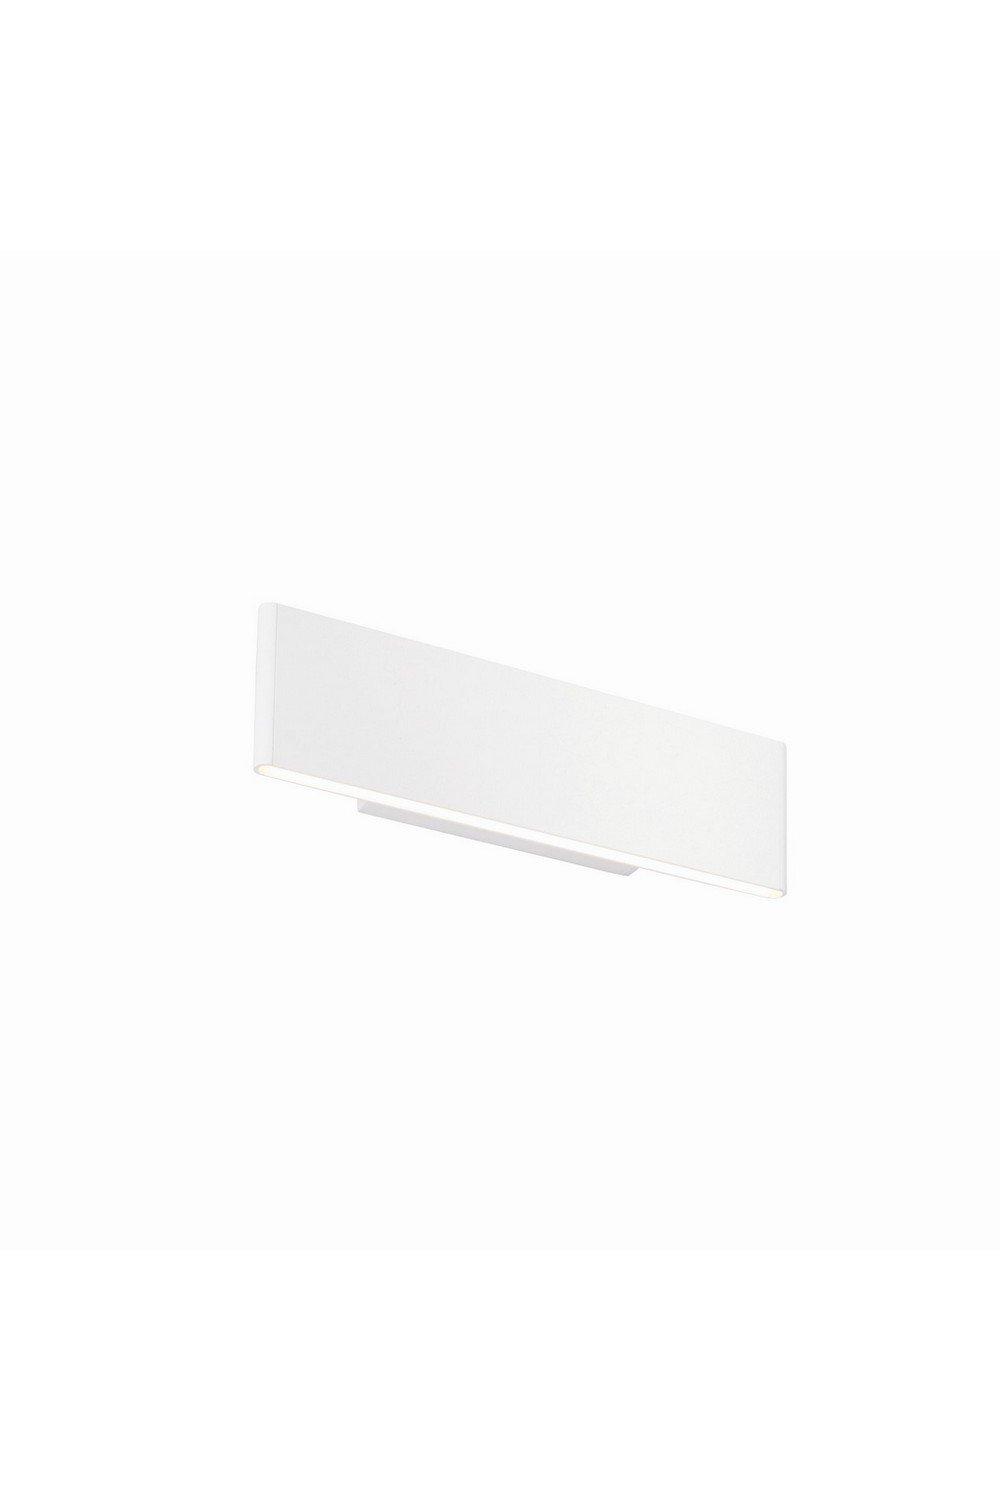 Bodhi Integrated LED Wall Textured Matt White Paint & Frosted Acrylic 2 Light Dimmable IP20